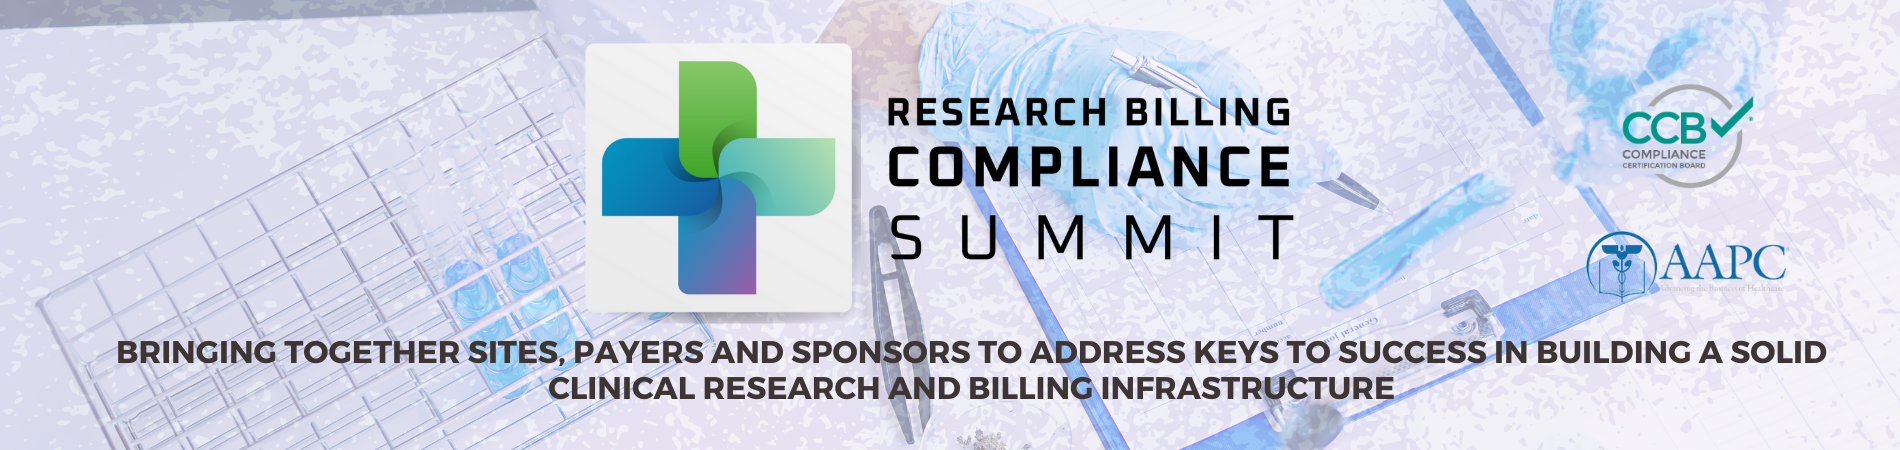 Research Billing Compliance Summit